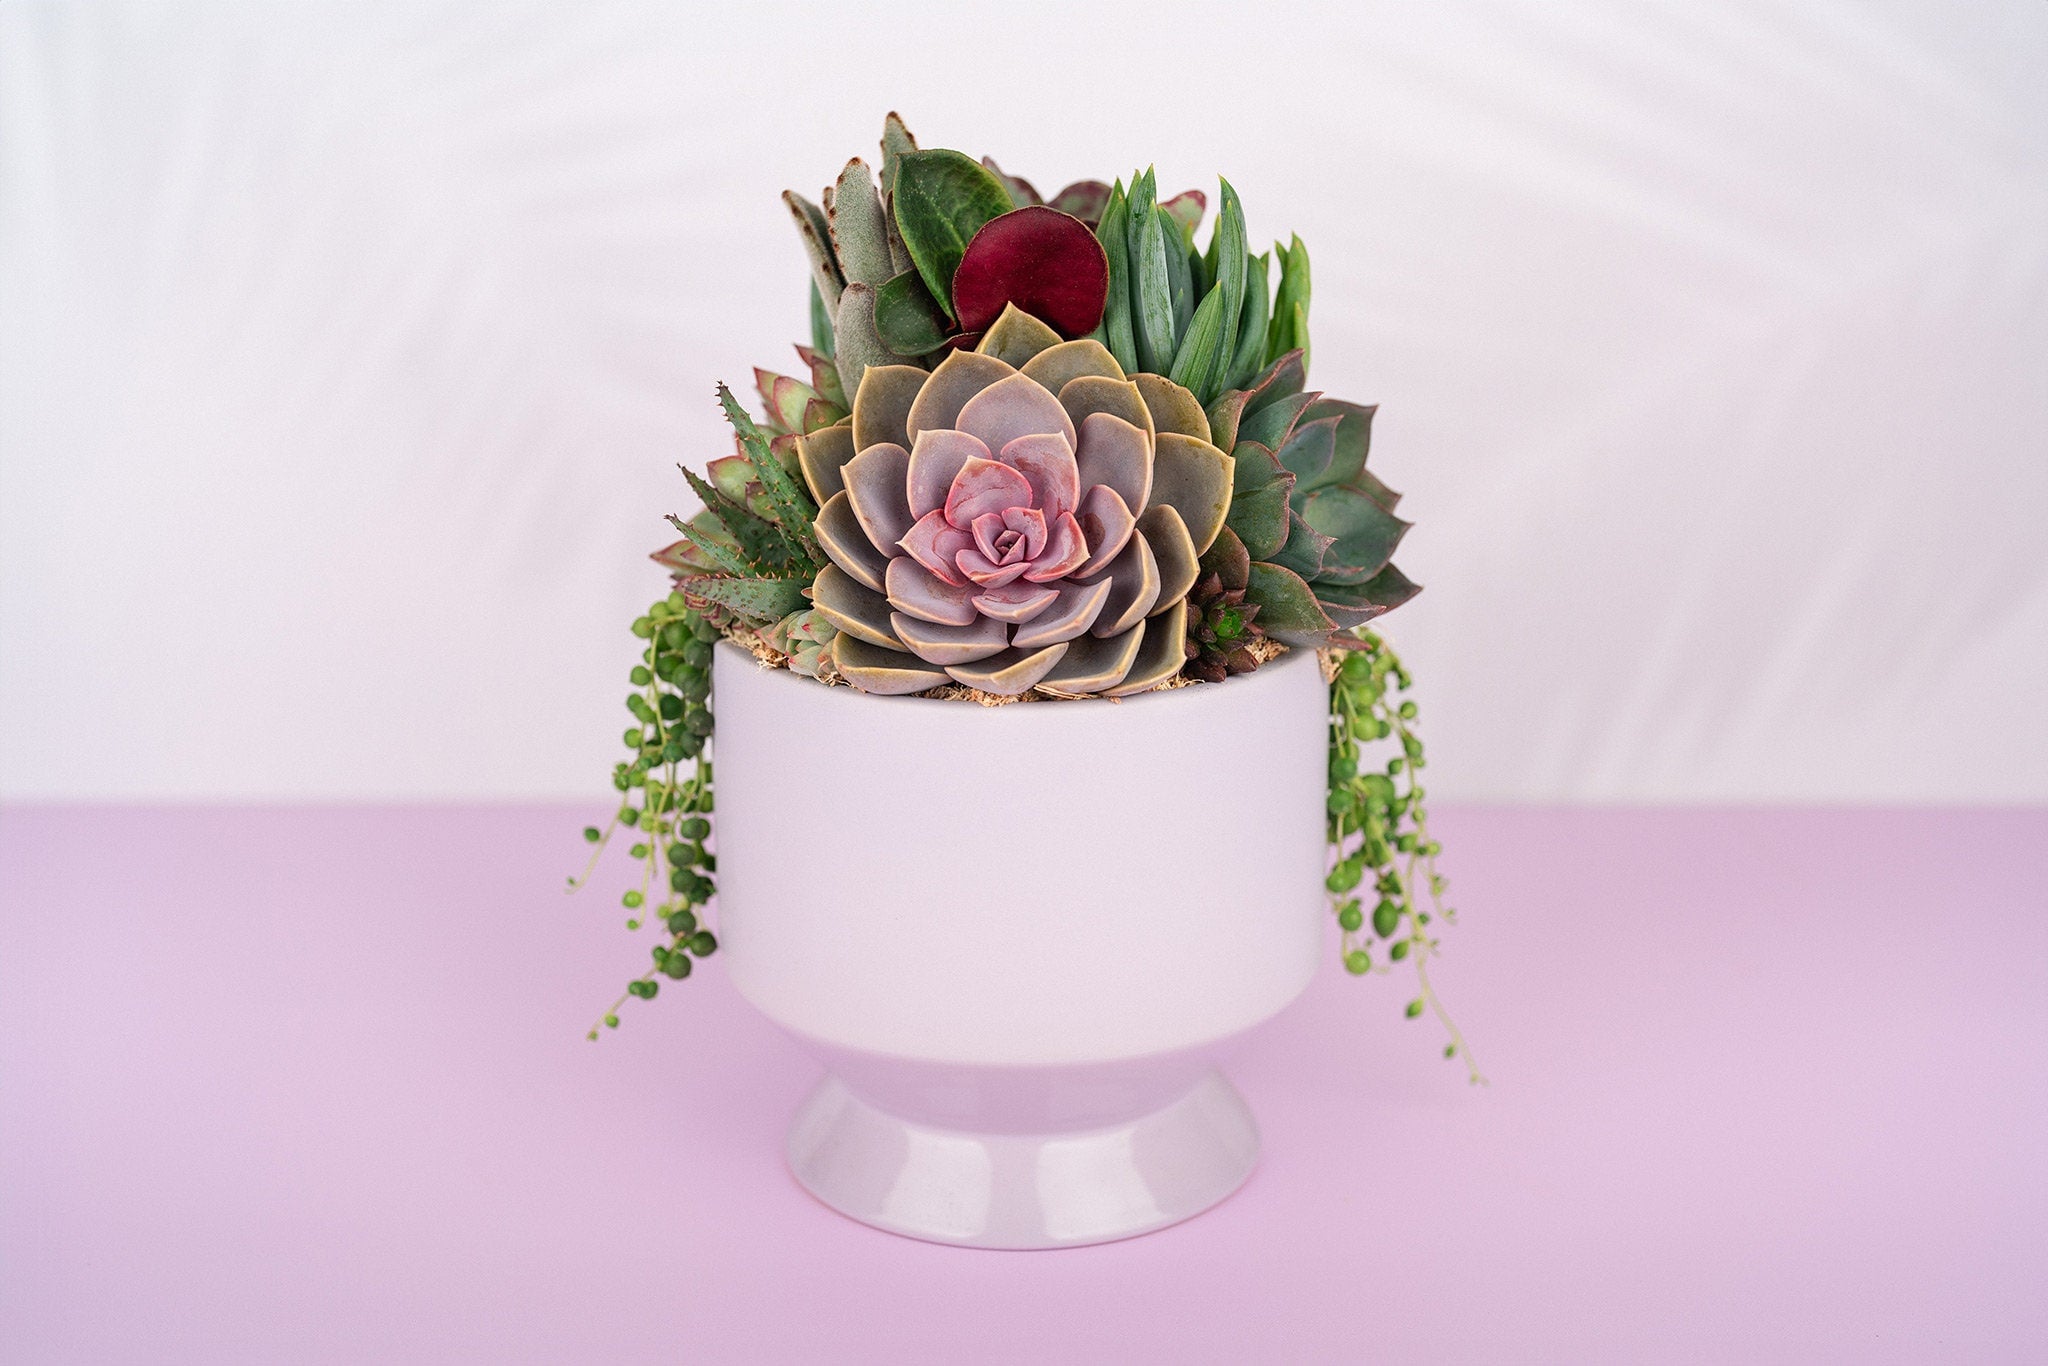 Light Purple (lilac) Footed Succulent Arrangement Planter: Living Succulent Gift, Centerpiece for Weddings and events, Housewarming Gift